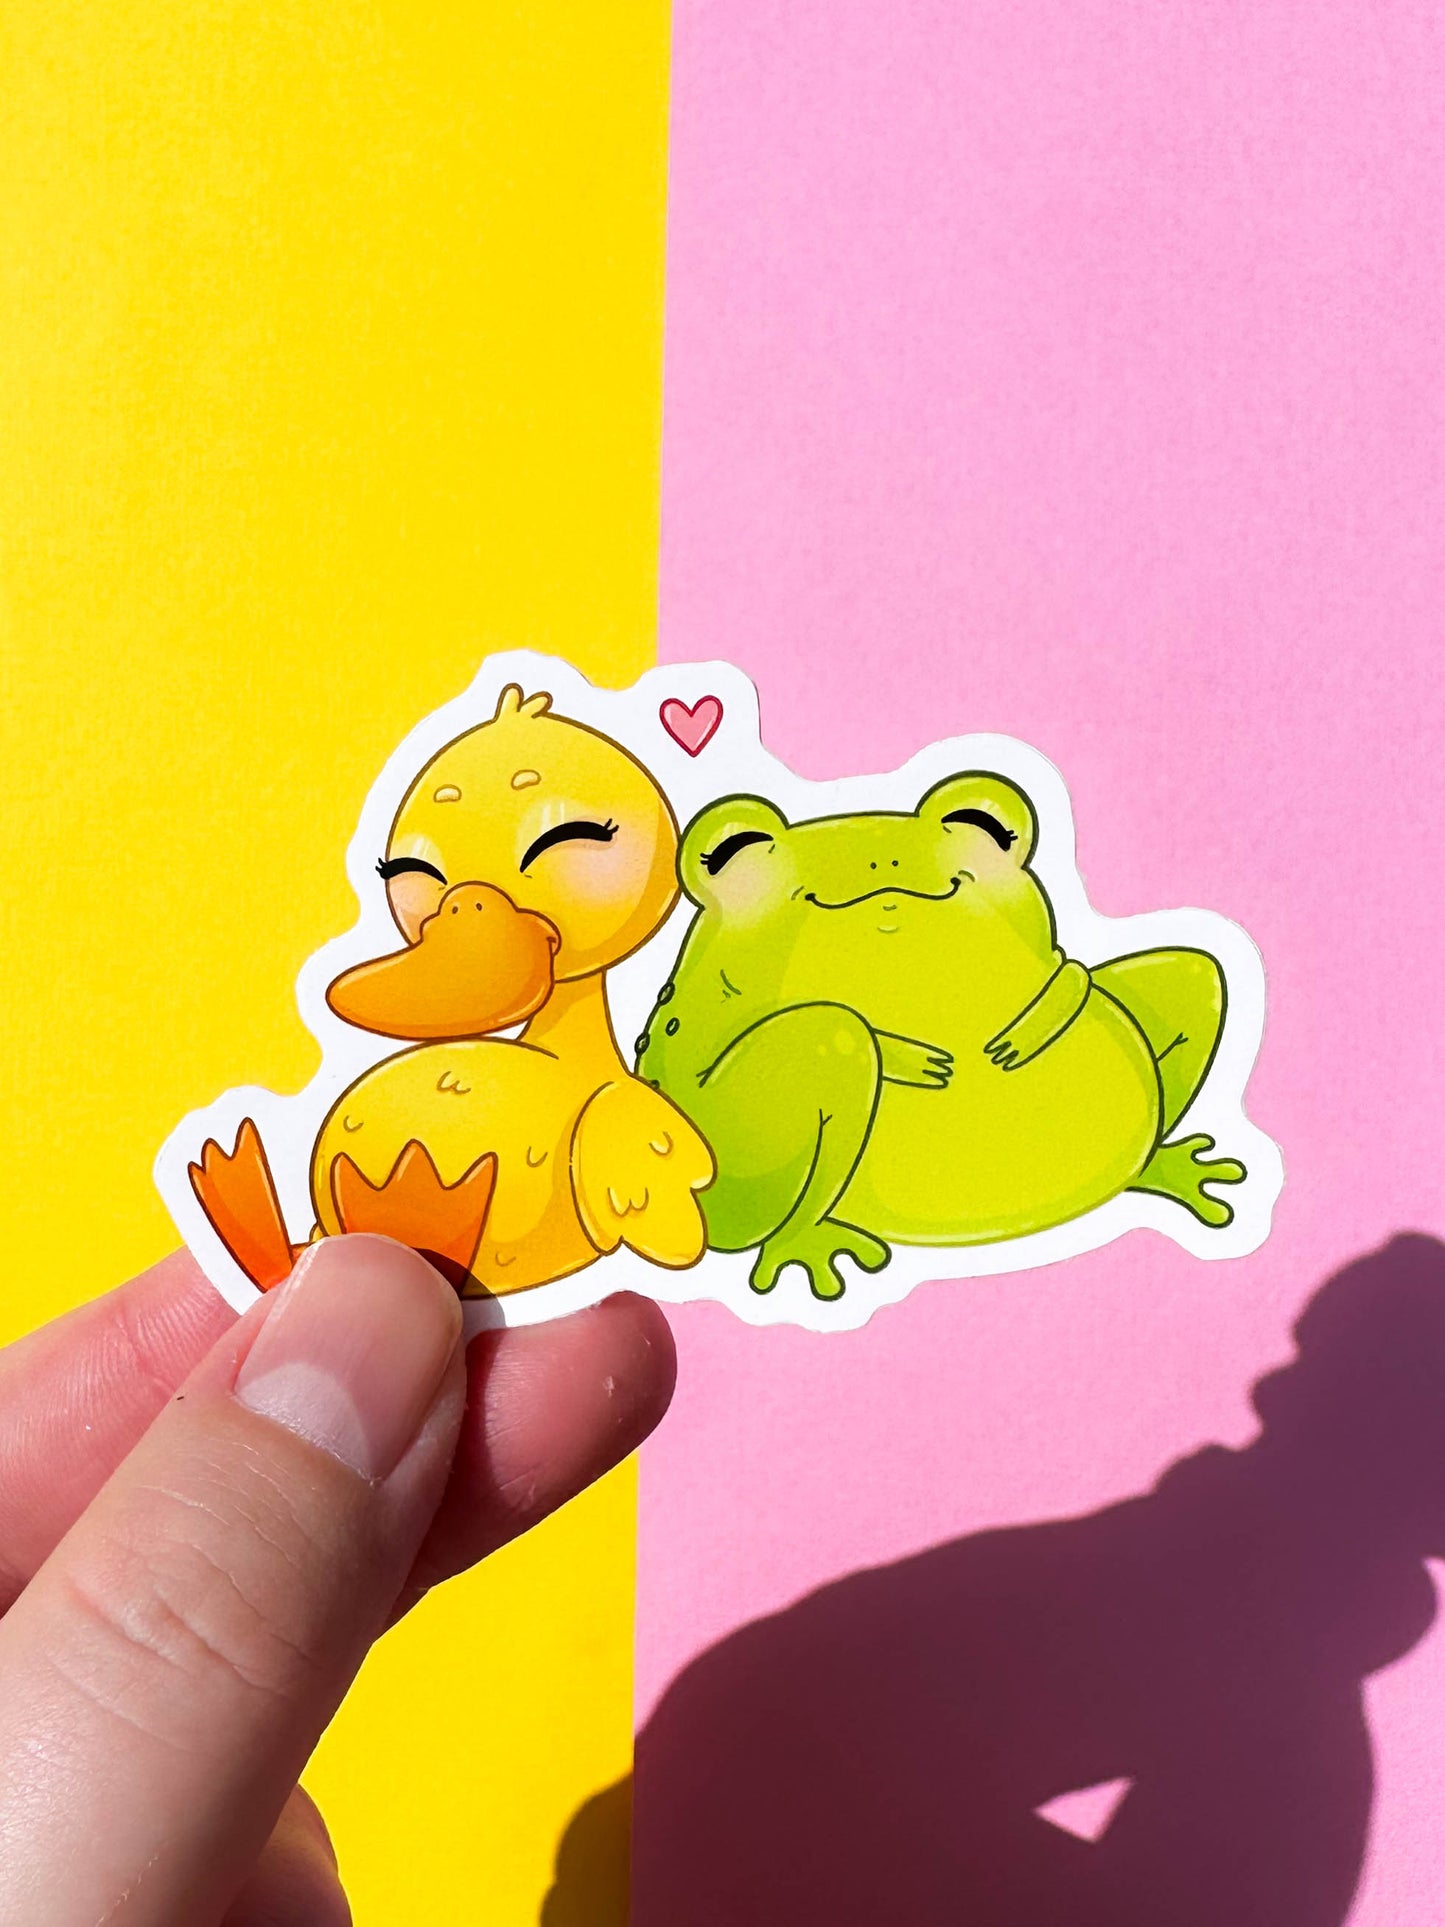 Froggy and Ducky Pals Vinyl Sticker